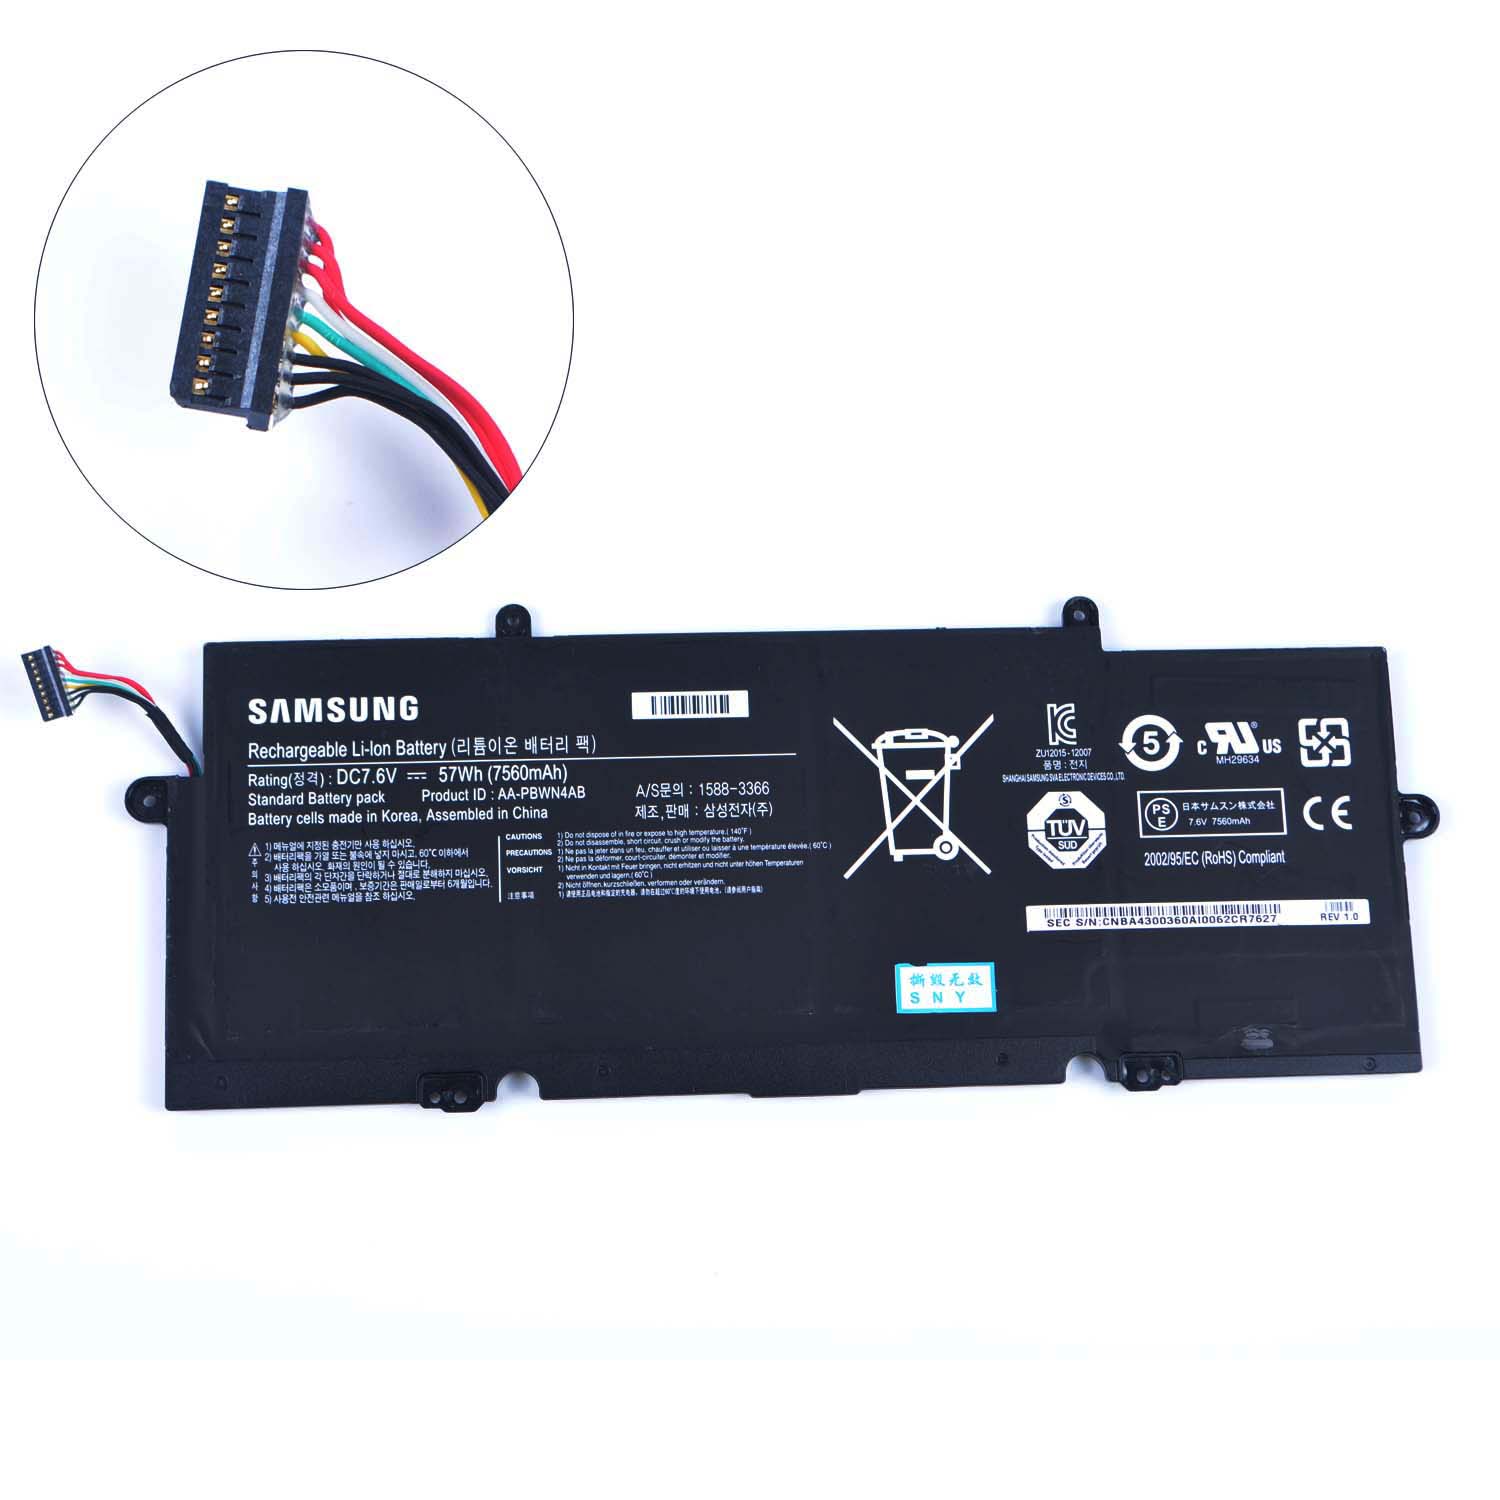 Replacement Battery for Samsung Samsung 740U3E-A01UB battery